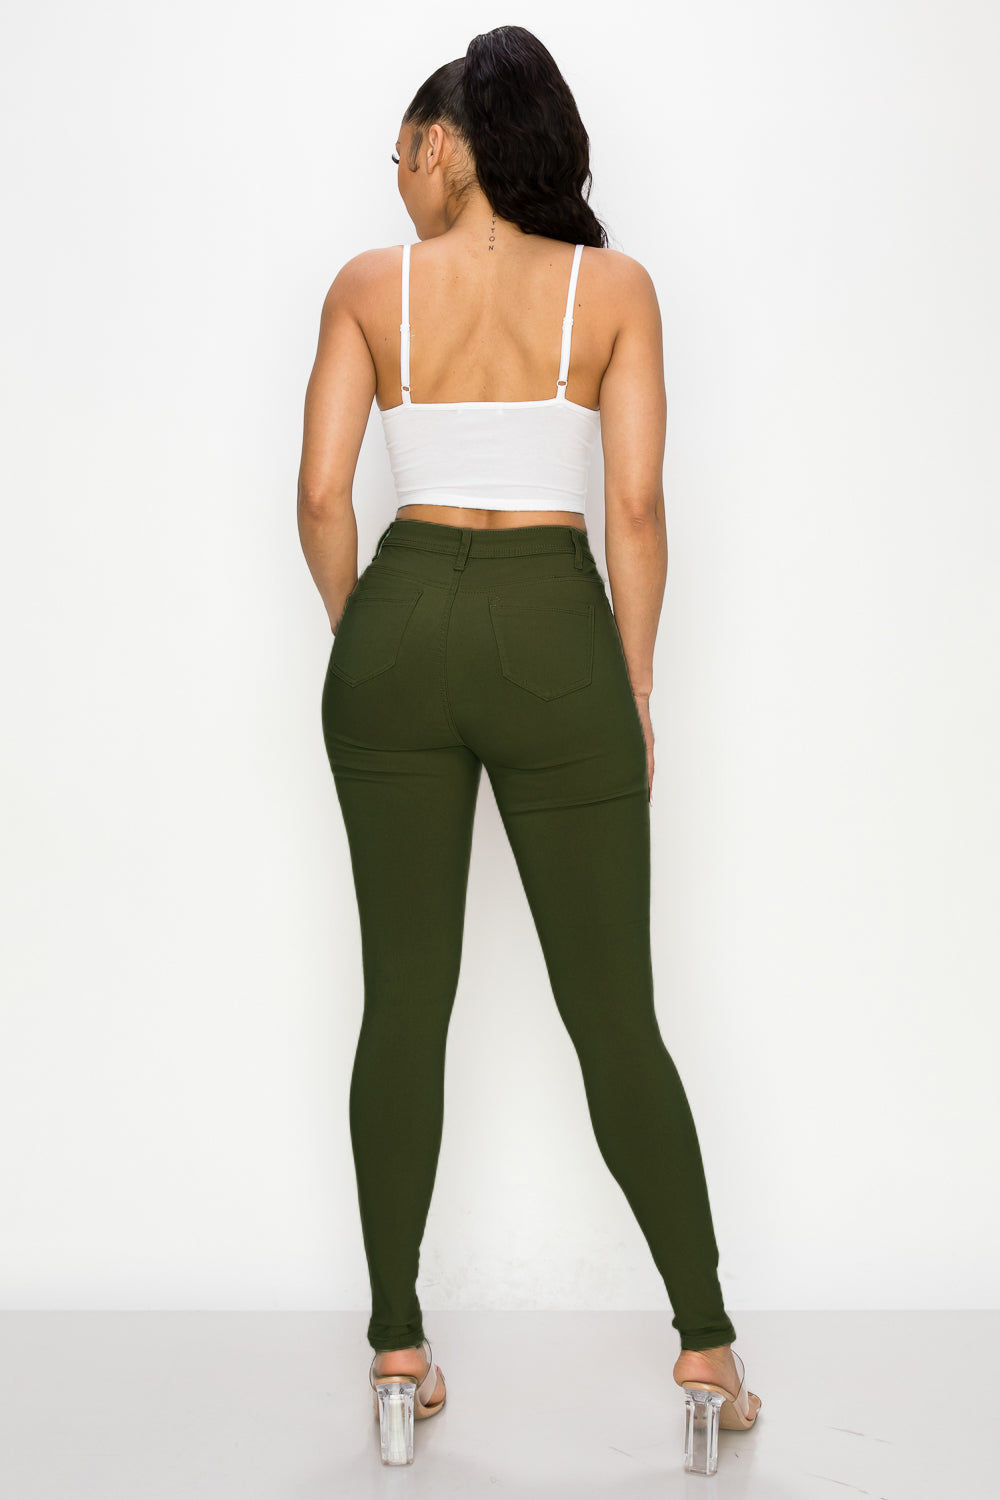 HIGH WAISTED COLORED SUPER-STRETCH OLIVE - FASHION LOVER JEANS BRAND